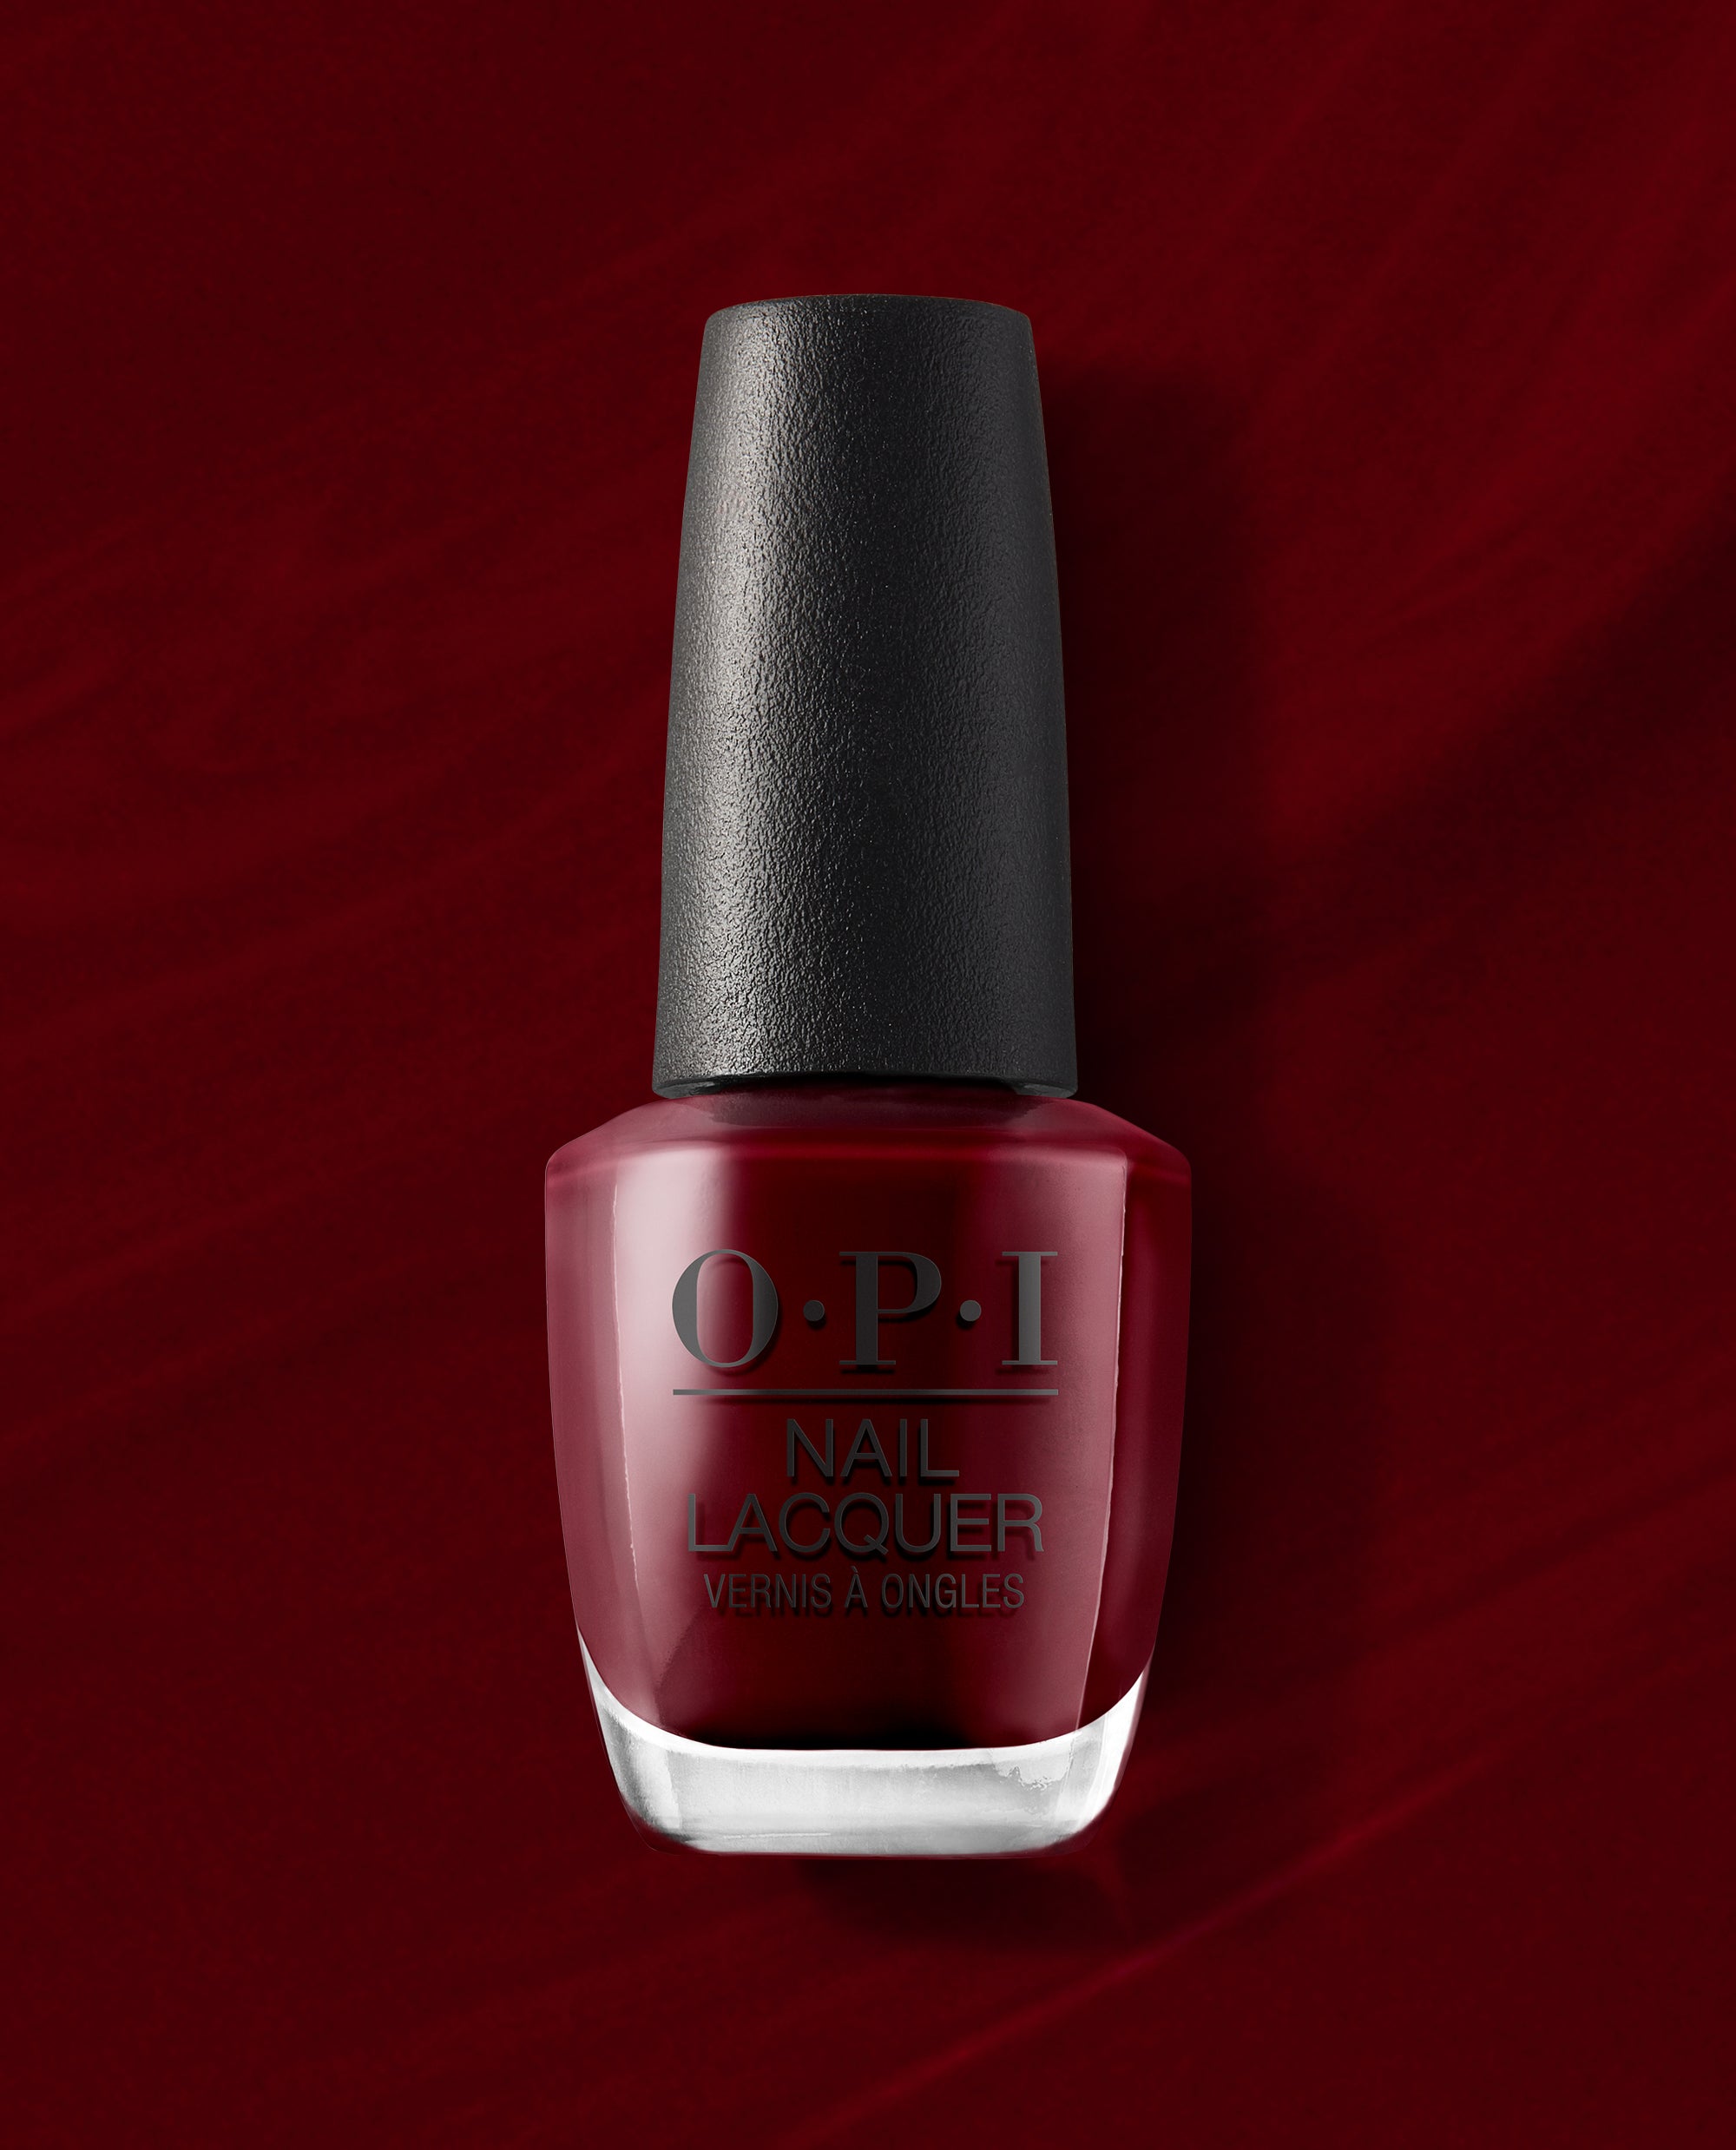 This Is The Most Popular Dark Red Nail Polish In The World